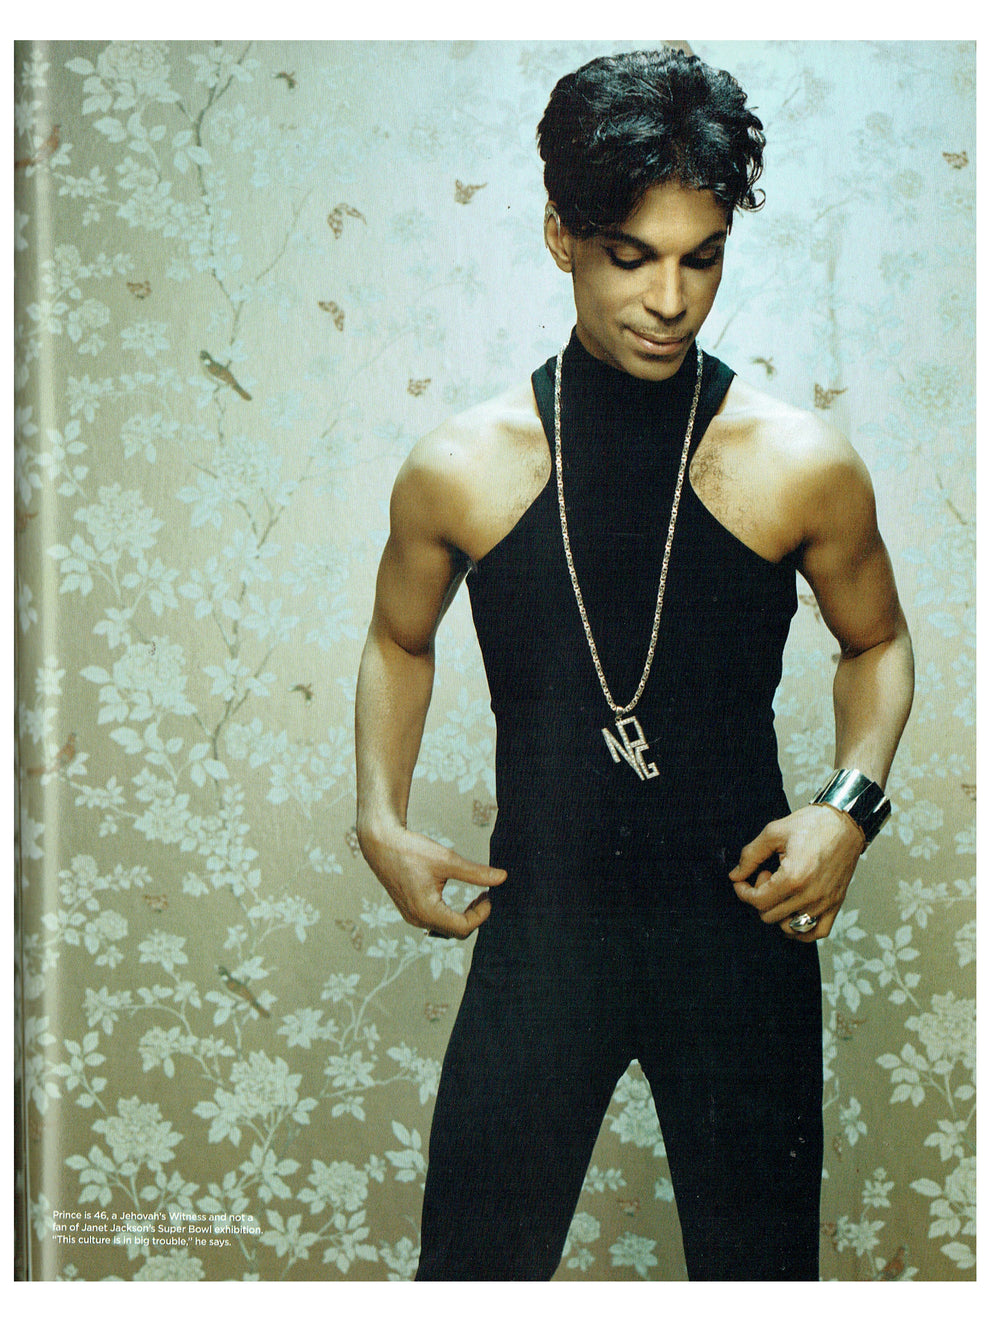 Prince Word Magazine August 2004 Cover & 7 Page Article